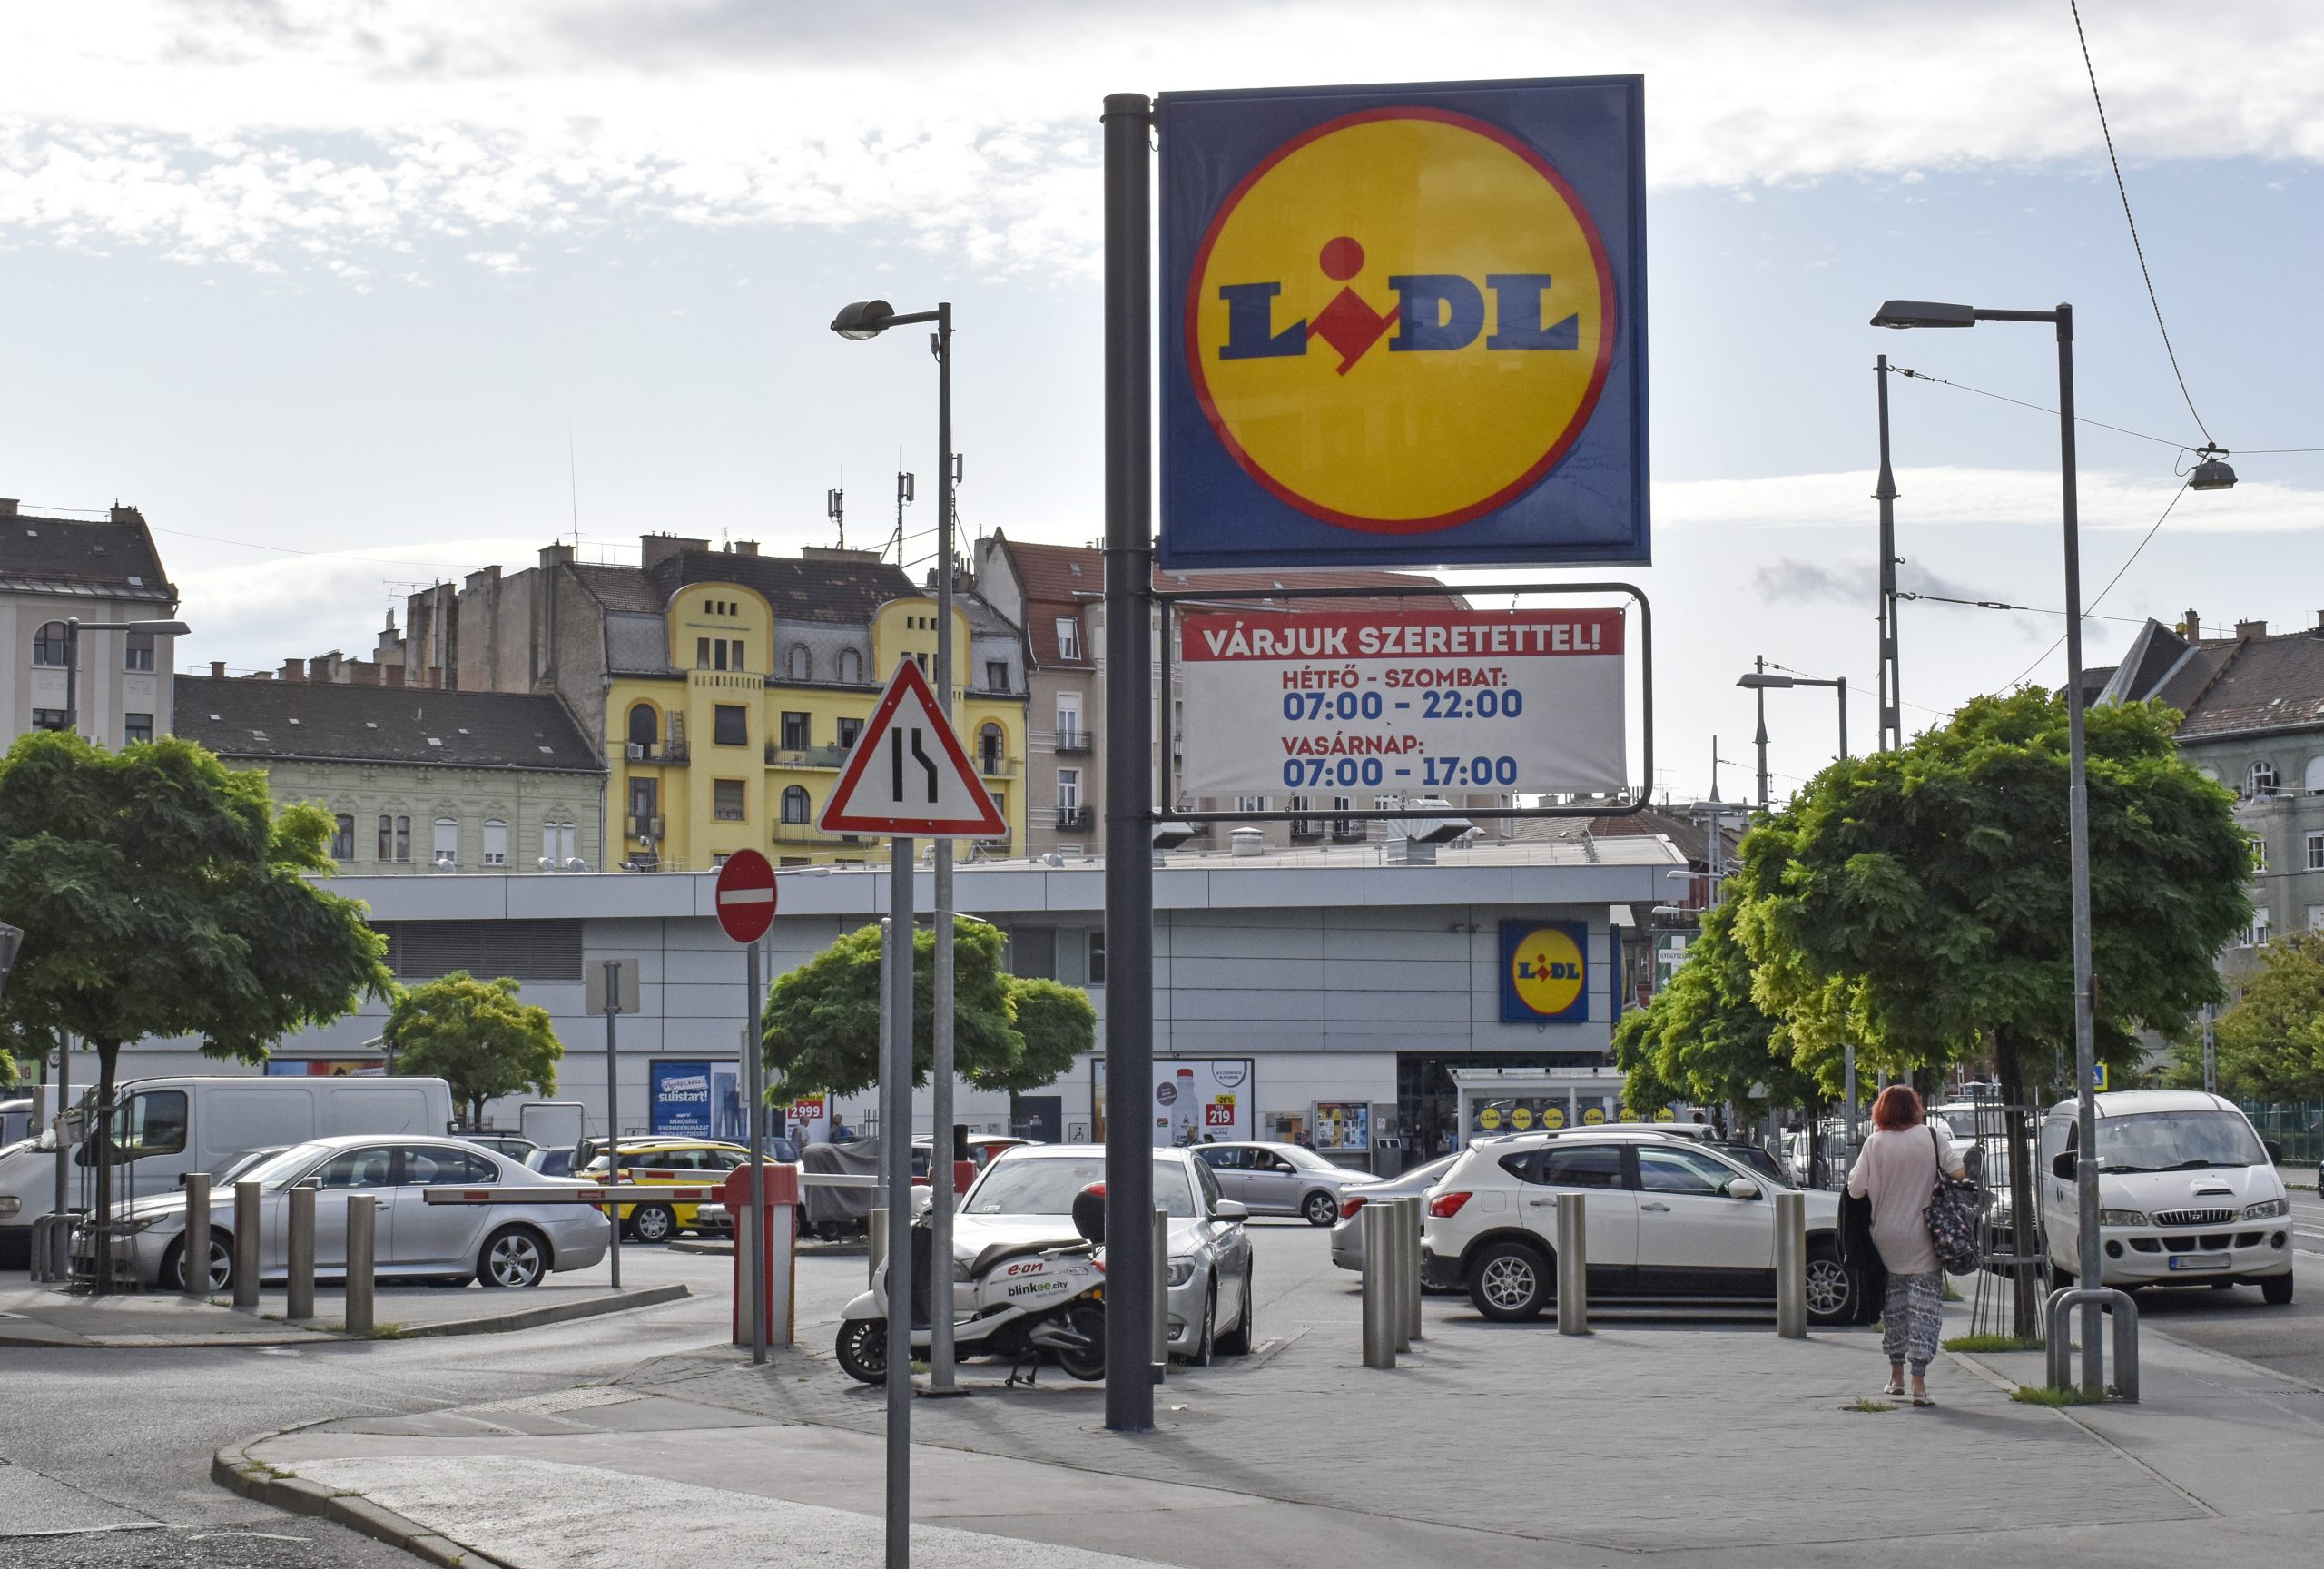 Is It Cheaper to Shop Abroad? Price Comparison of Hungarian and Foreign Aldi and Lidl